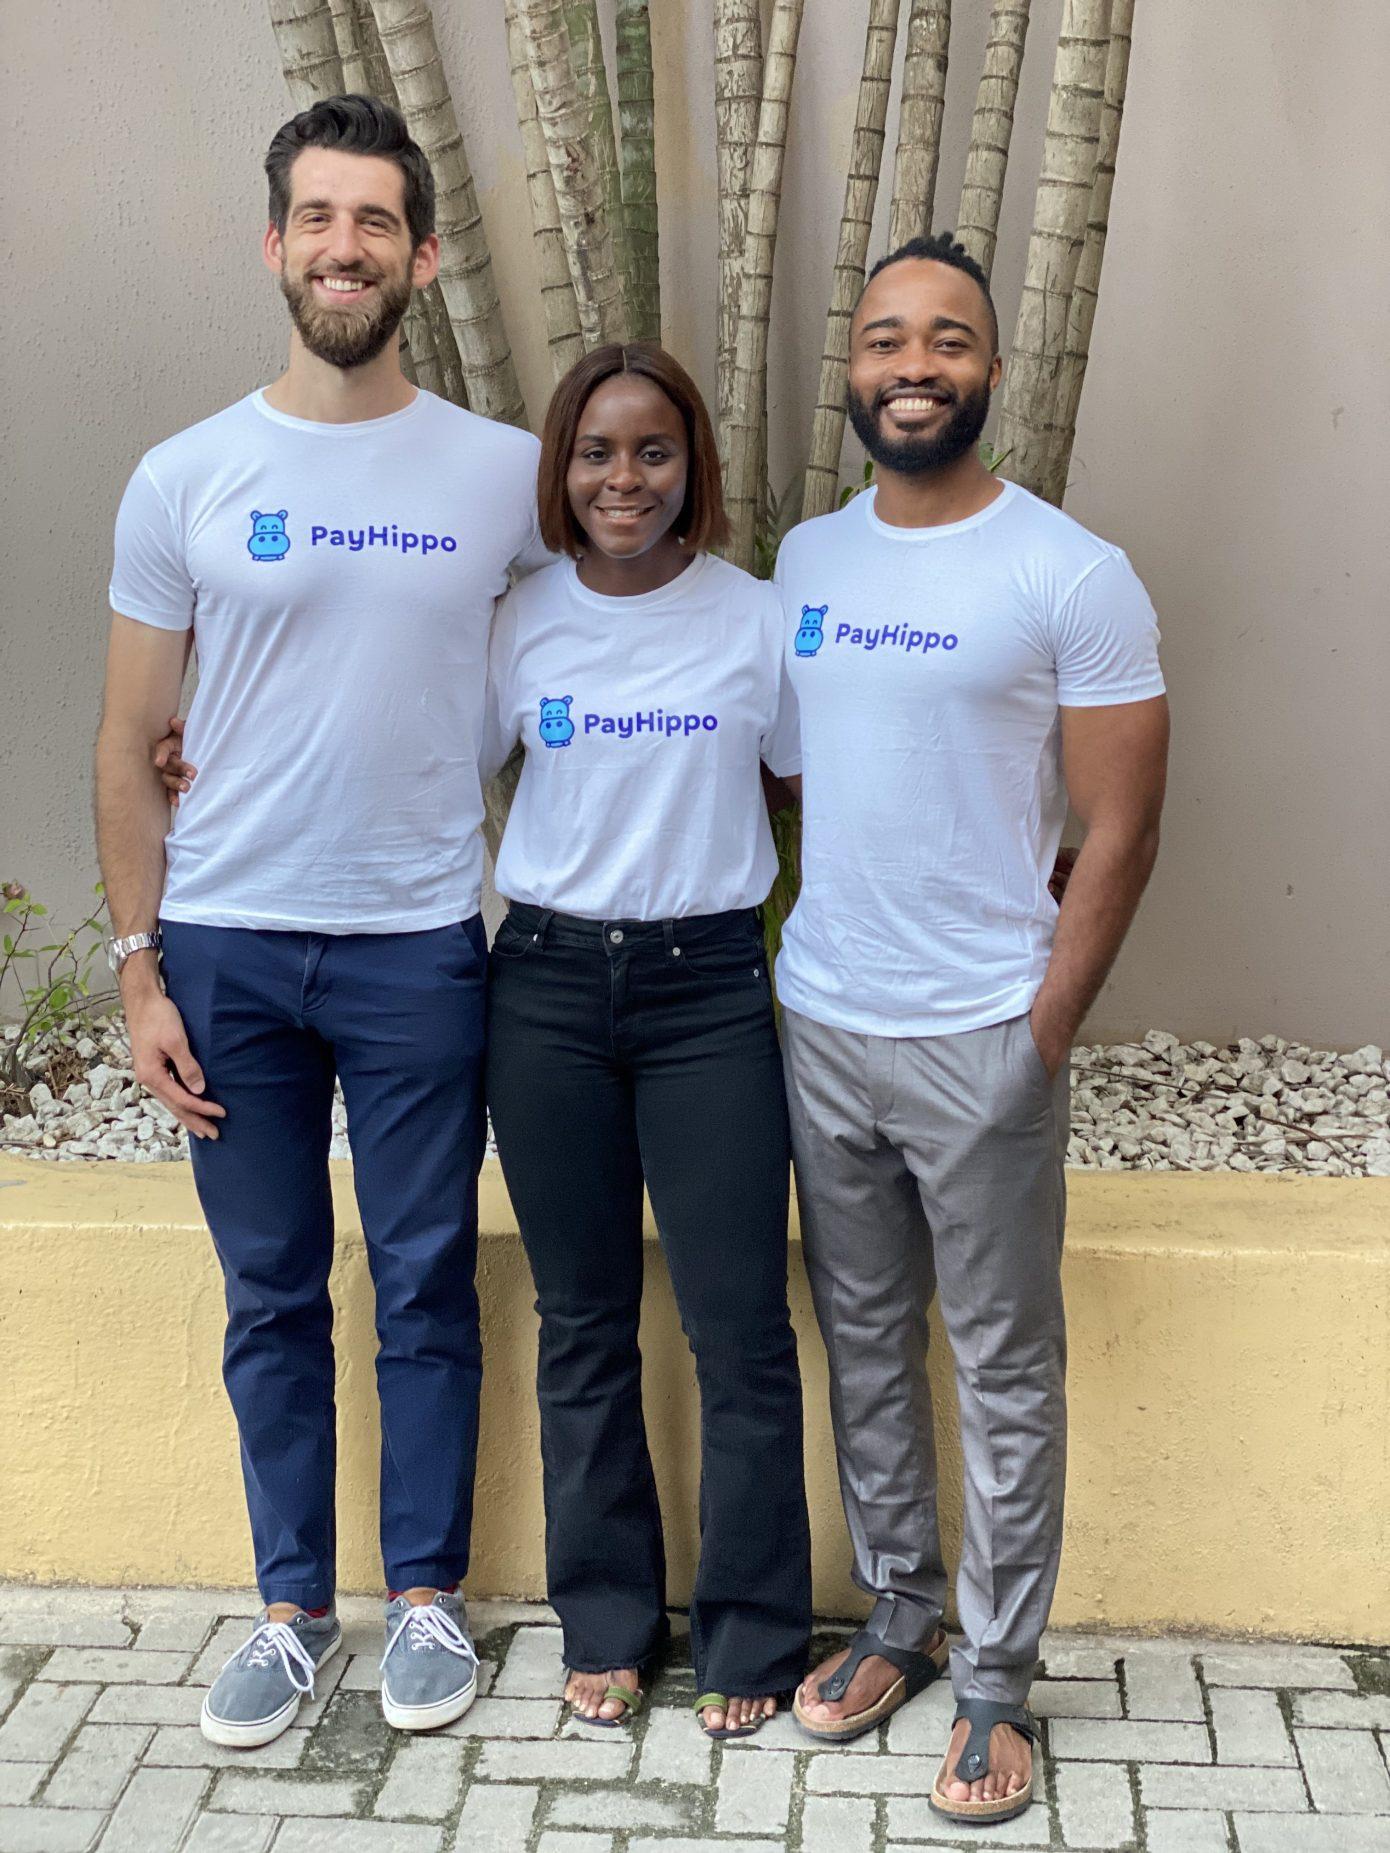 You are currently viewing Nigeria’s lender Payhippo raises $3m in seed funding to extend quick loans to SMEs